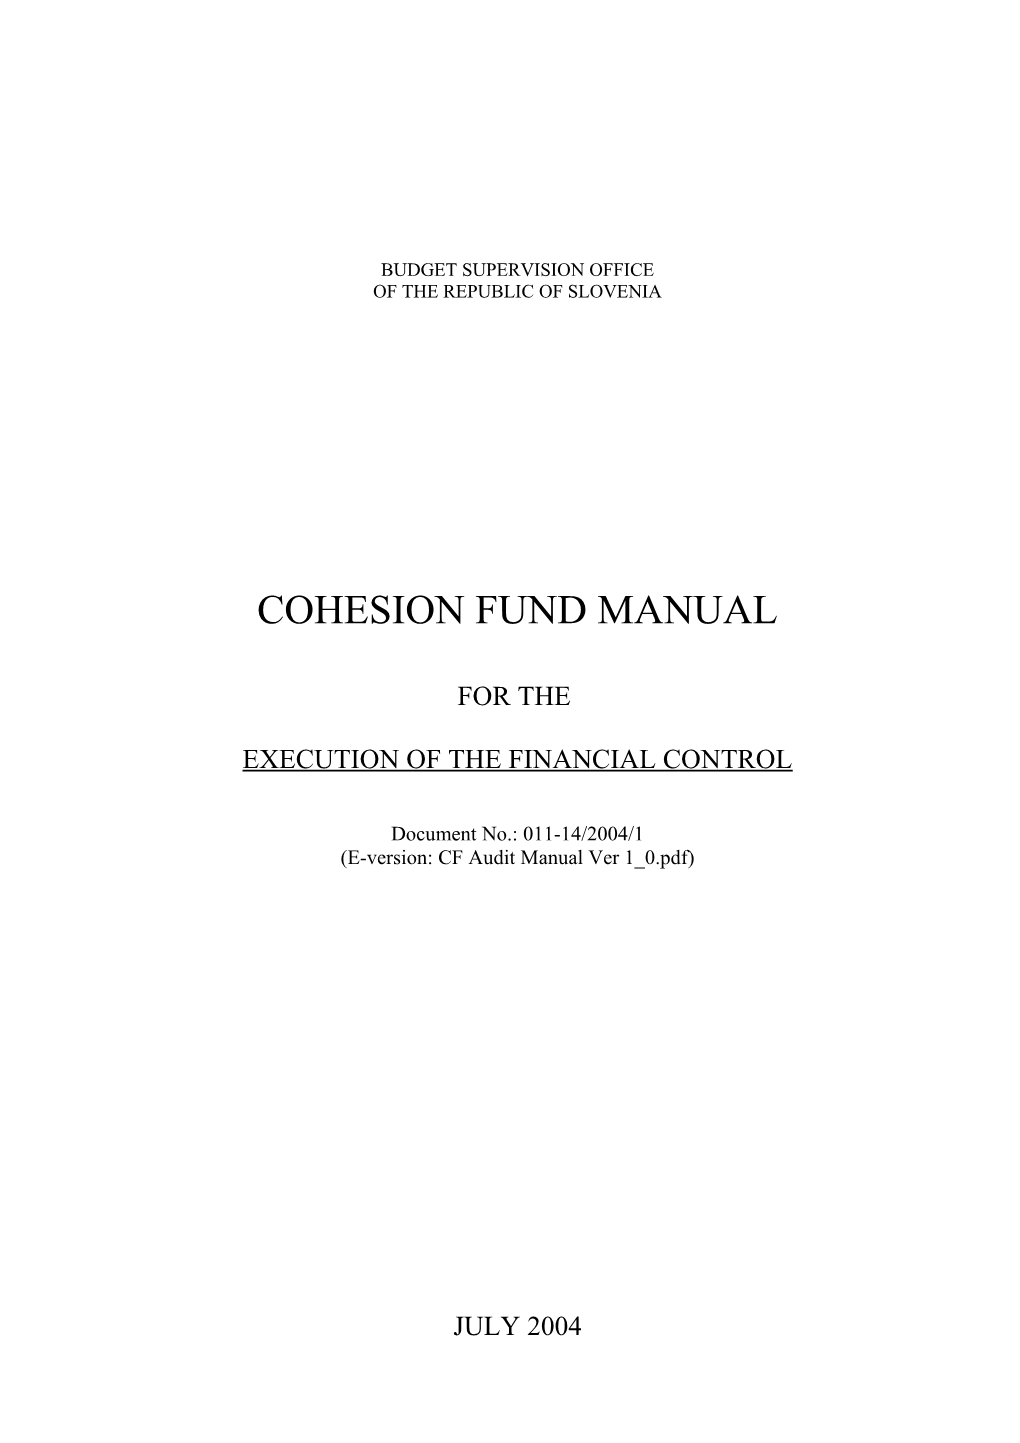 Cohesion Fund Manual